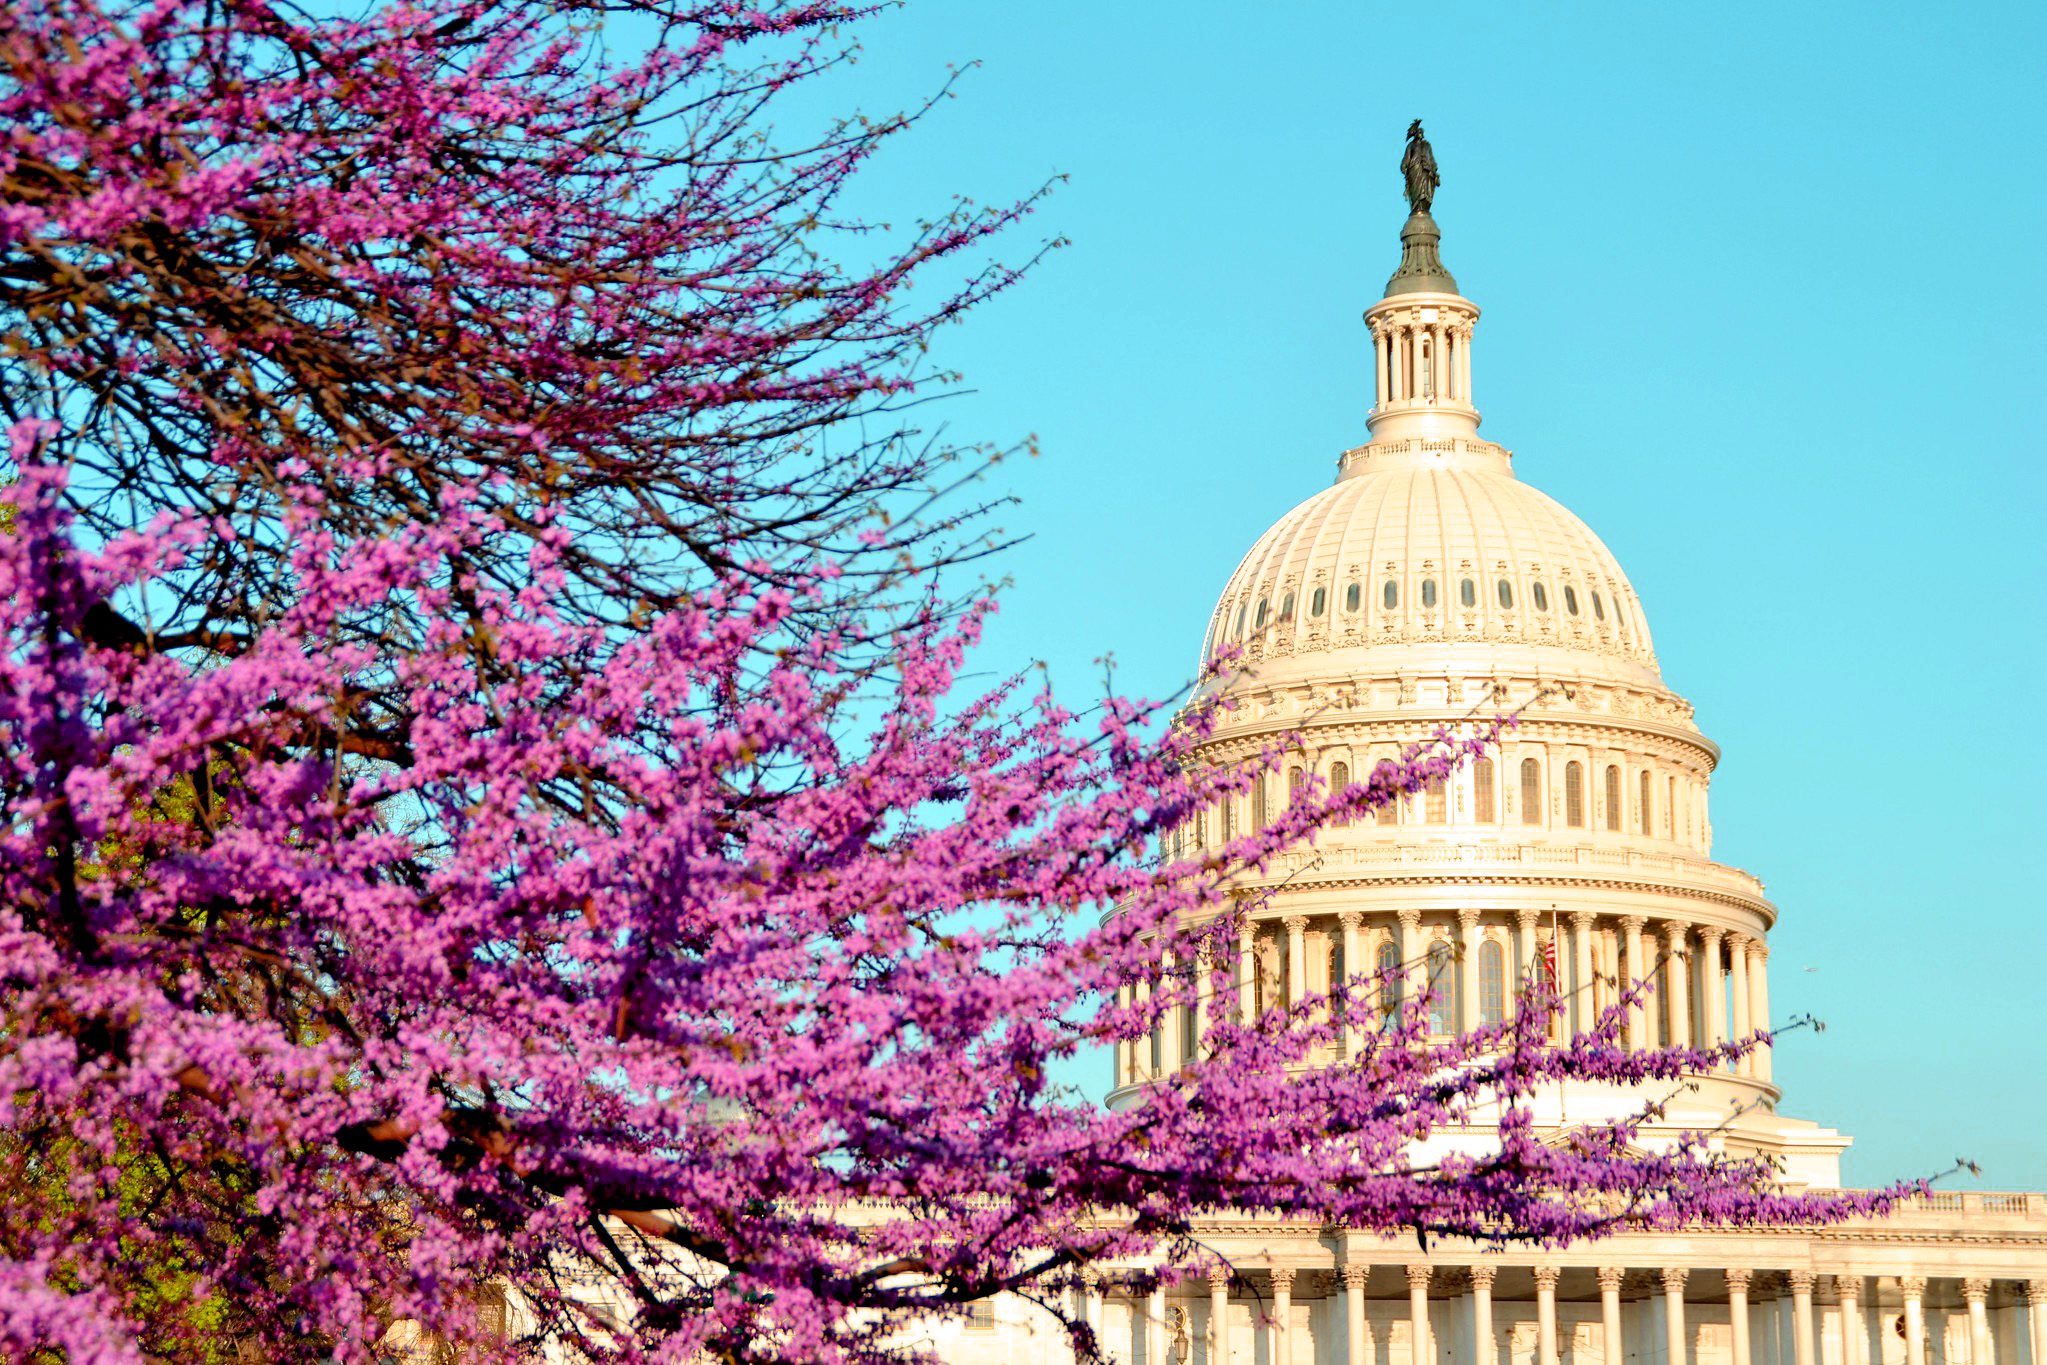 A blossoming tree sticks out in front of the U.S. Capitol dome.